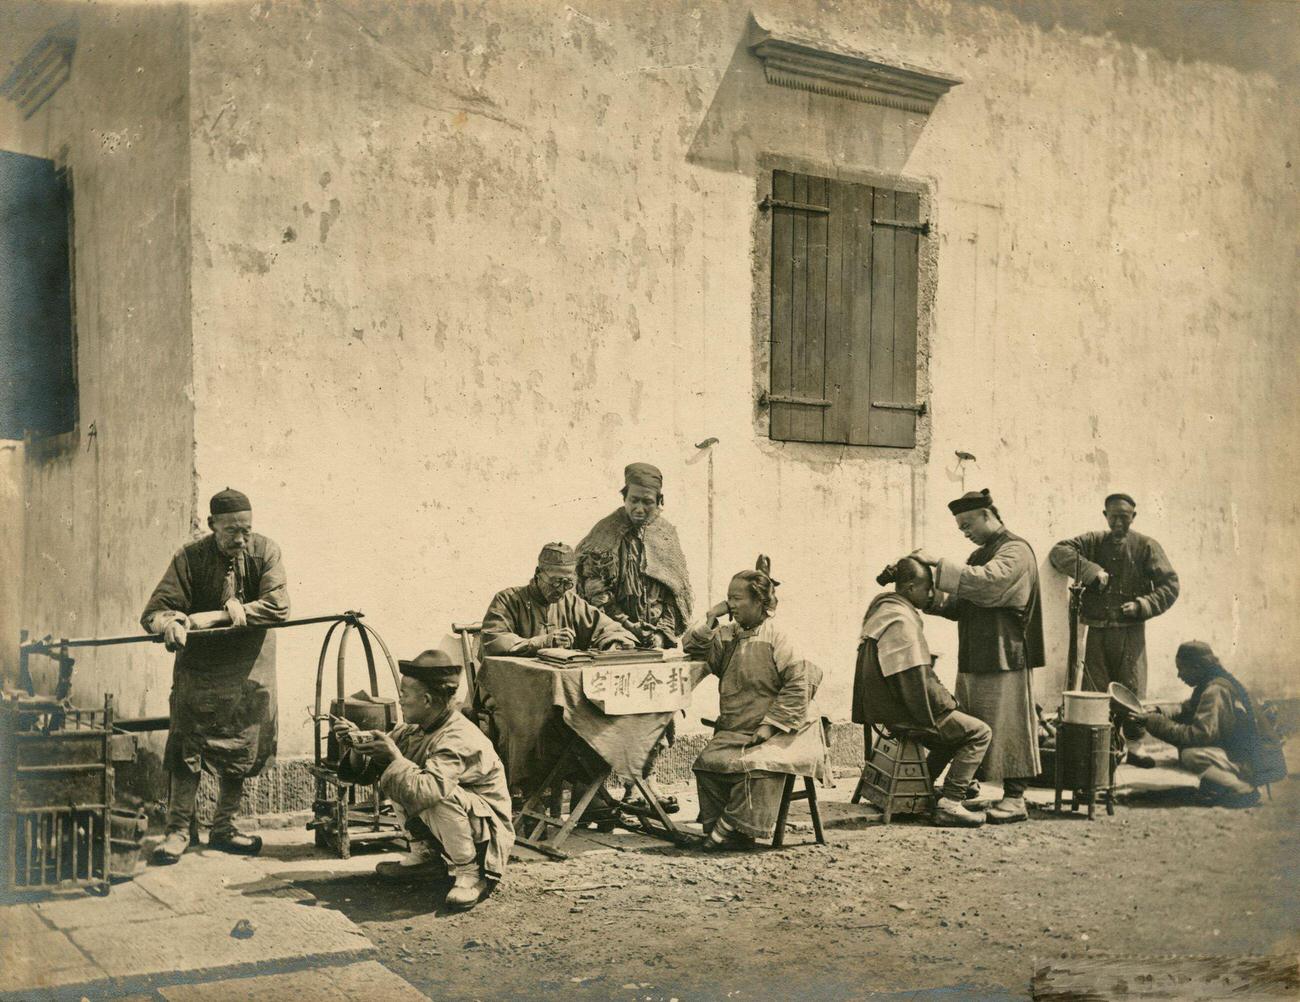 Scribe, Barber, and Tradesmen with Customers, China, 1872